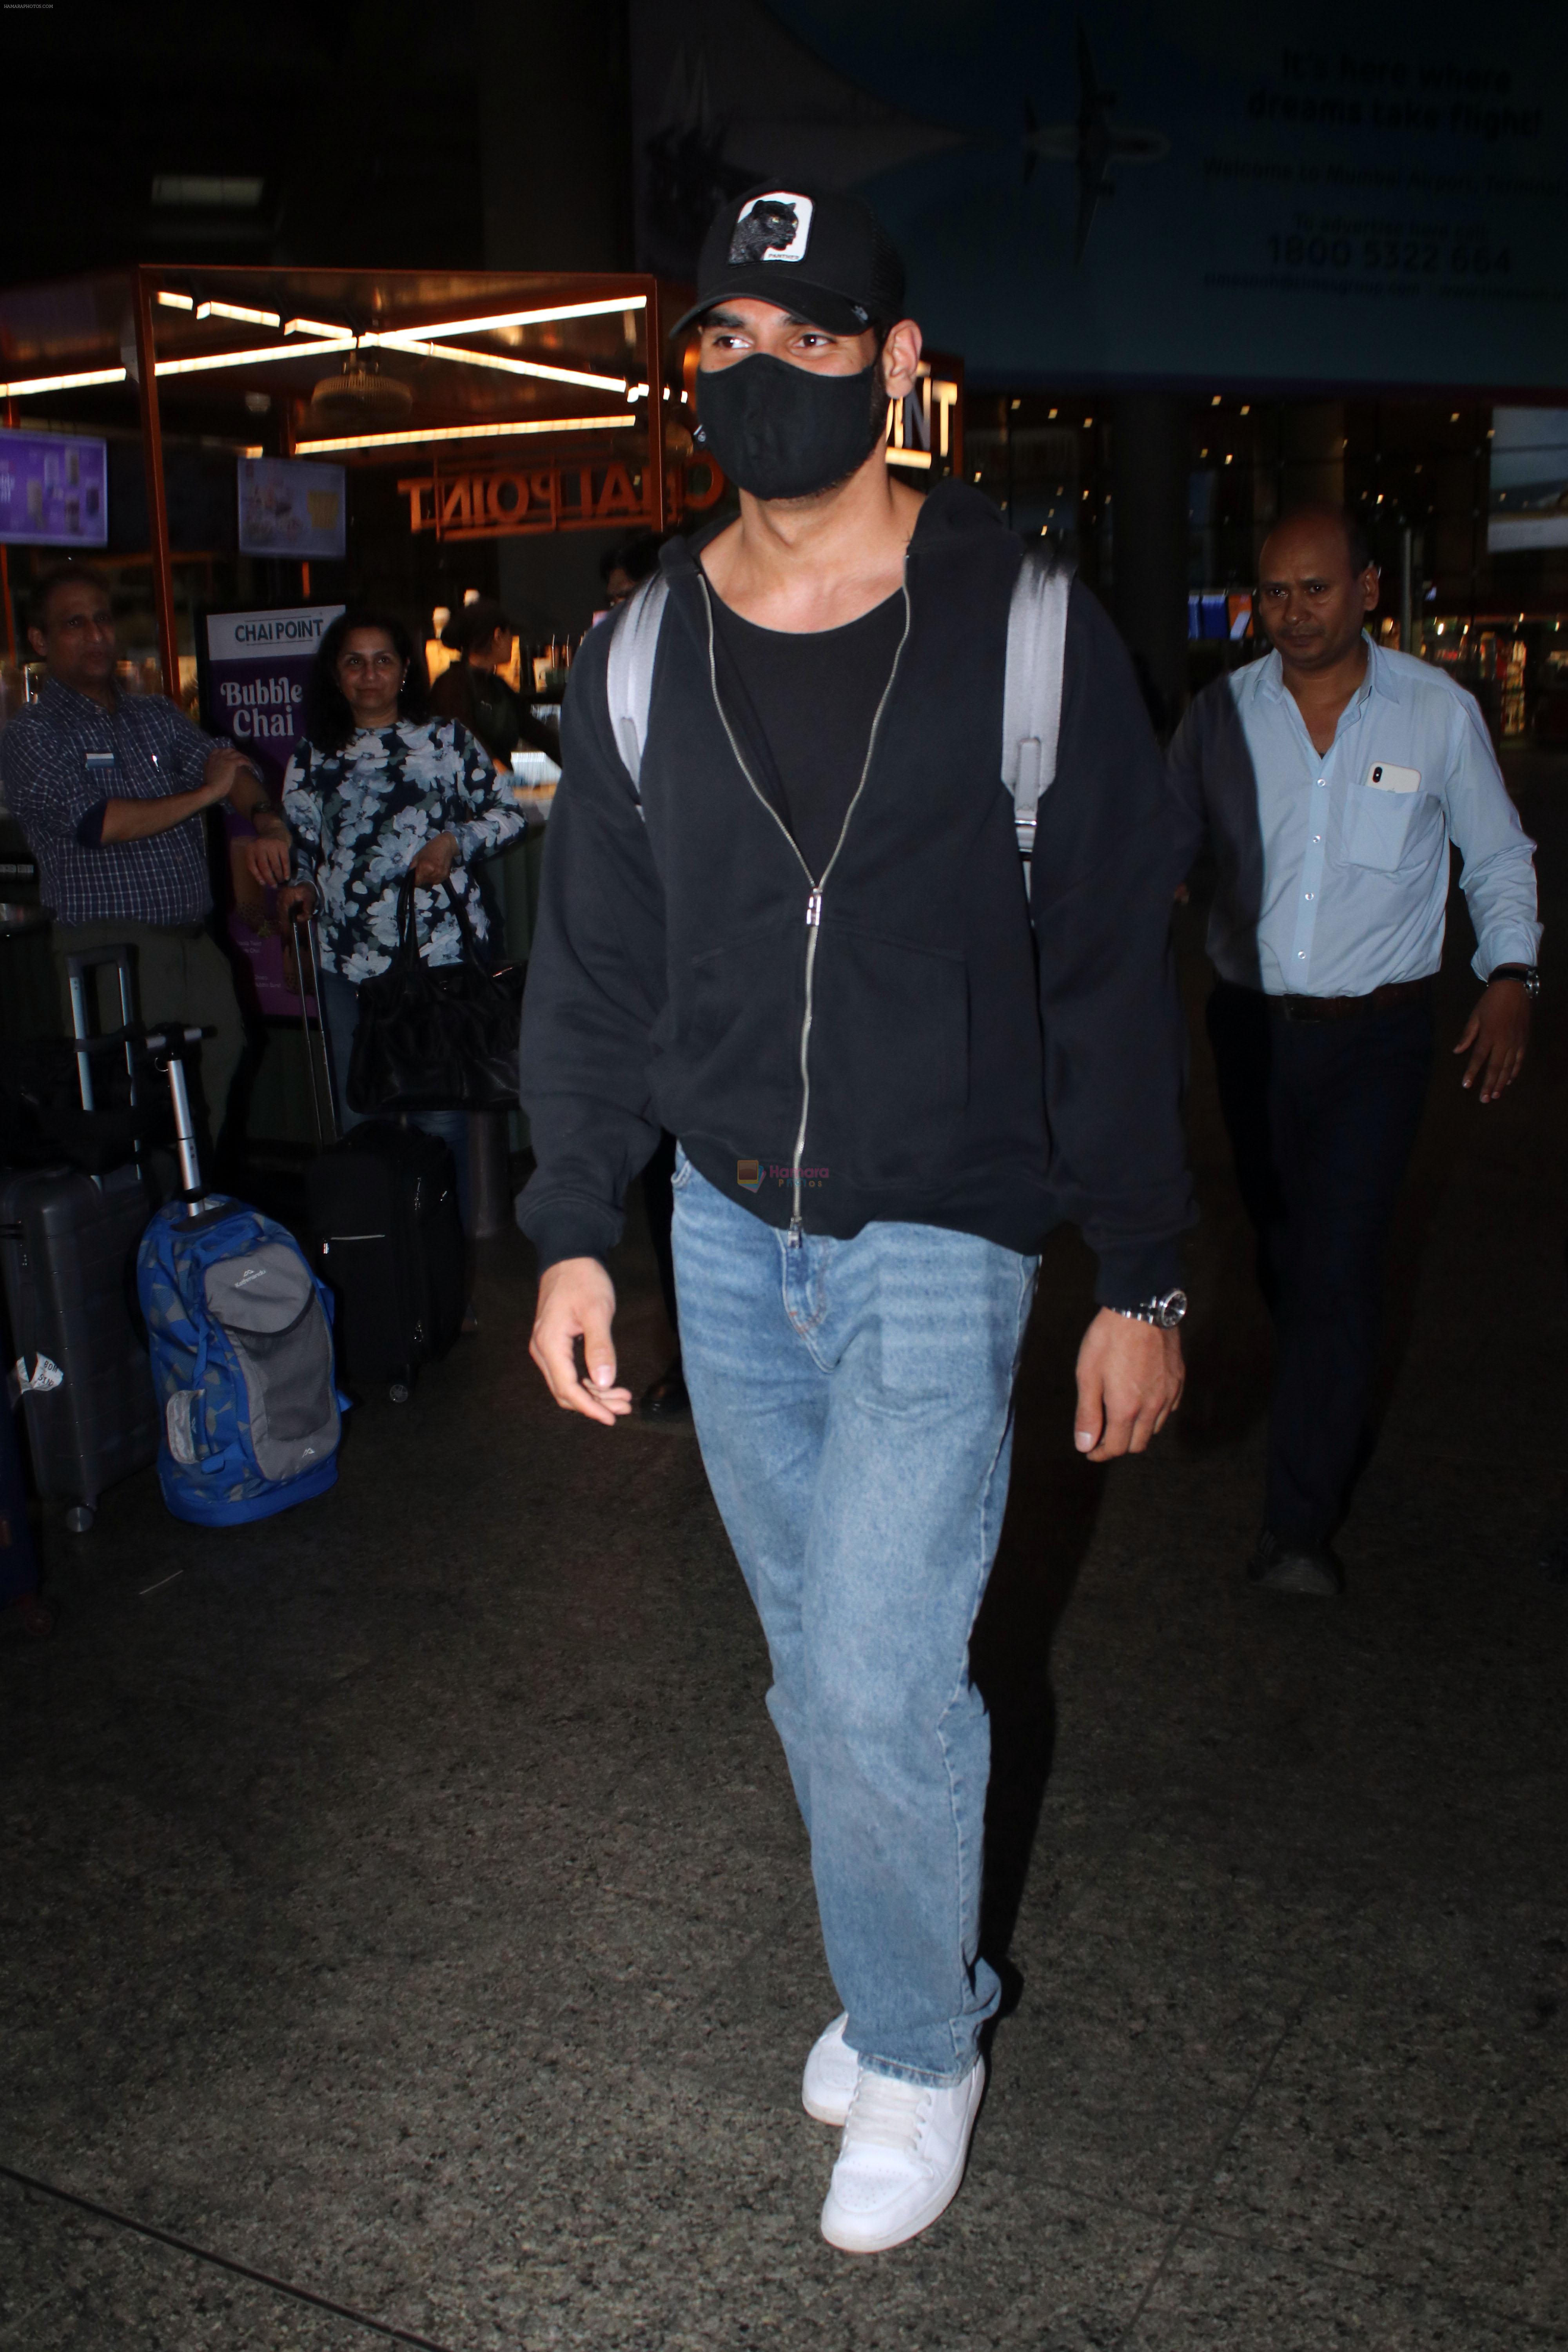 Ahan Shetty seen at the airport on 24 July 2023